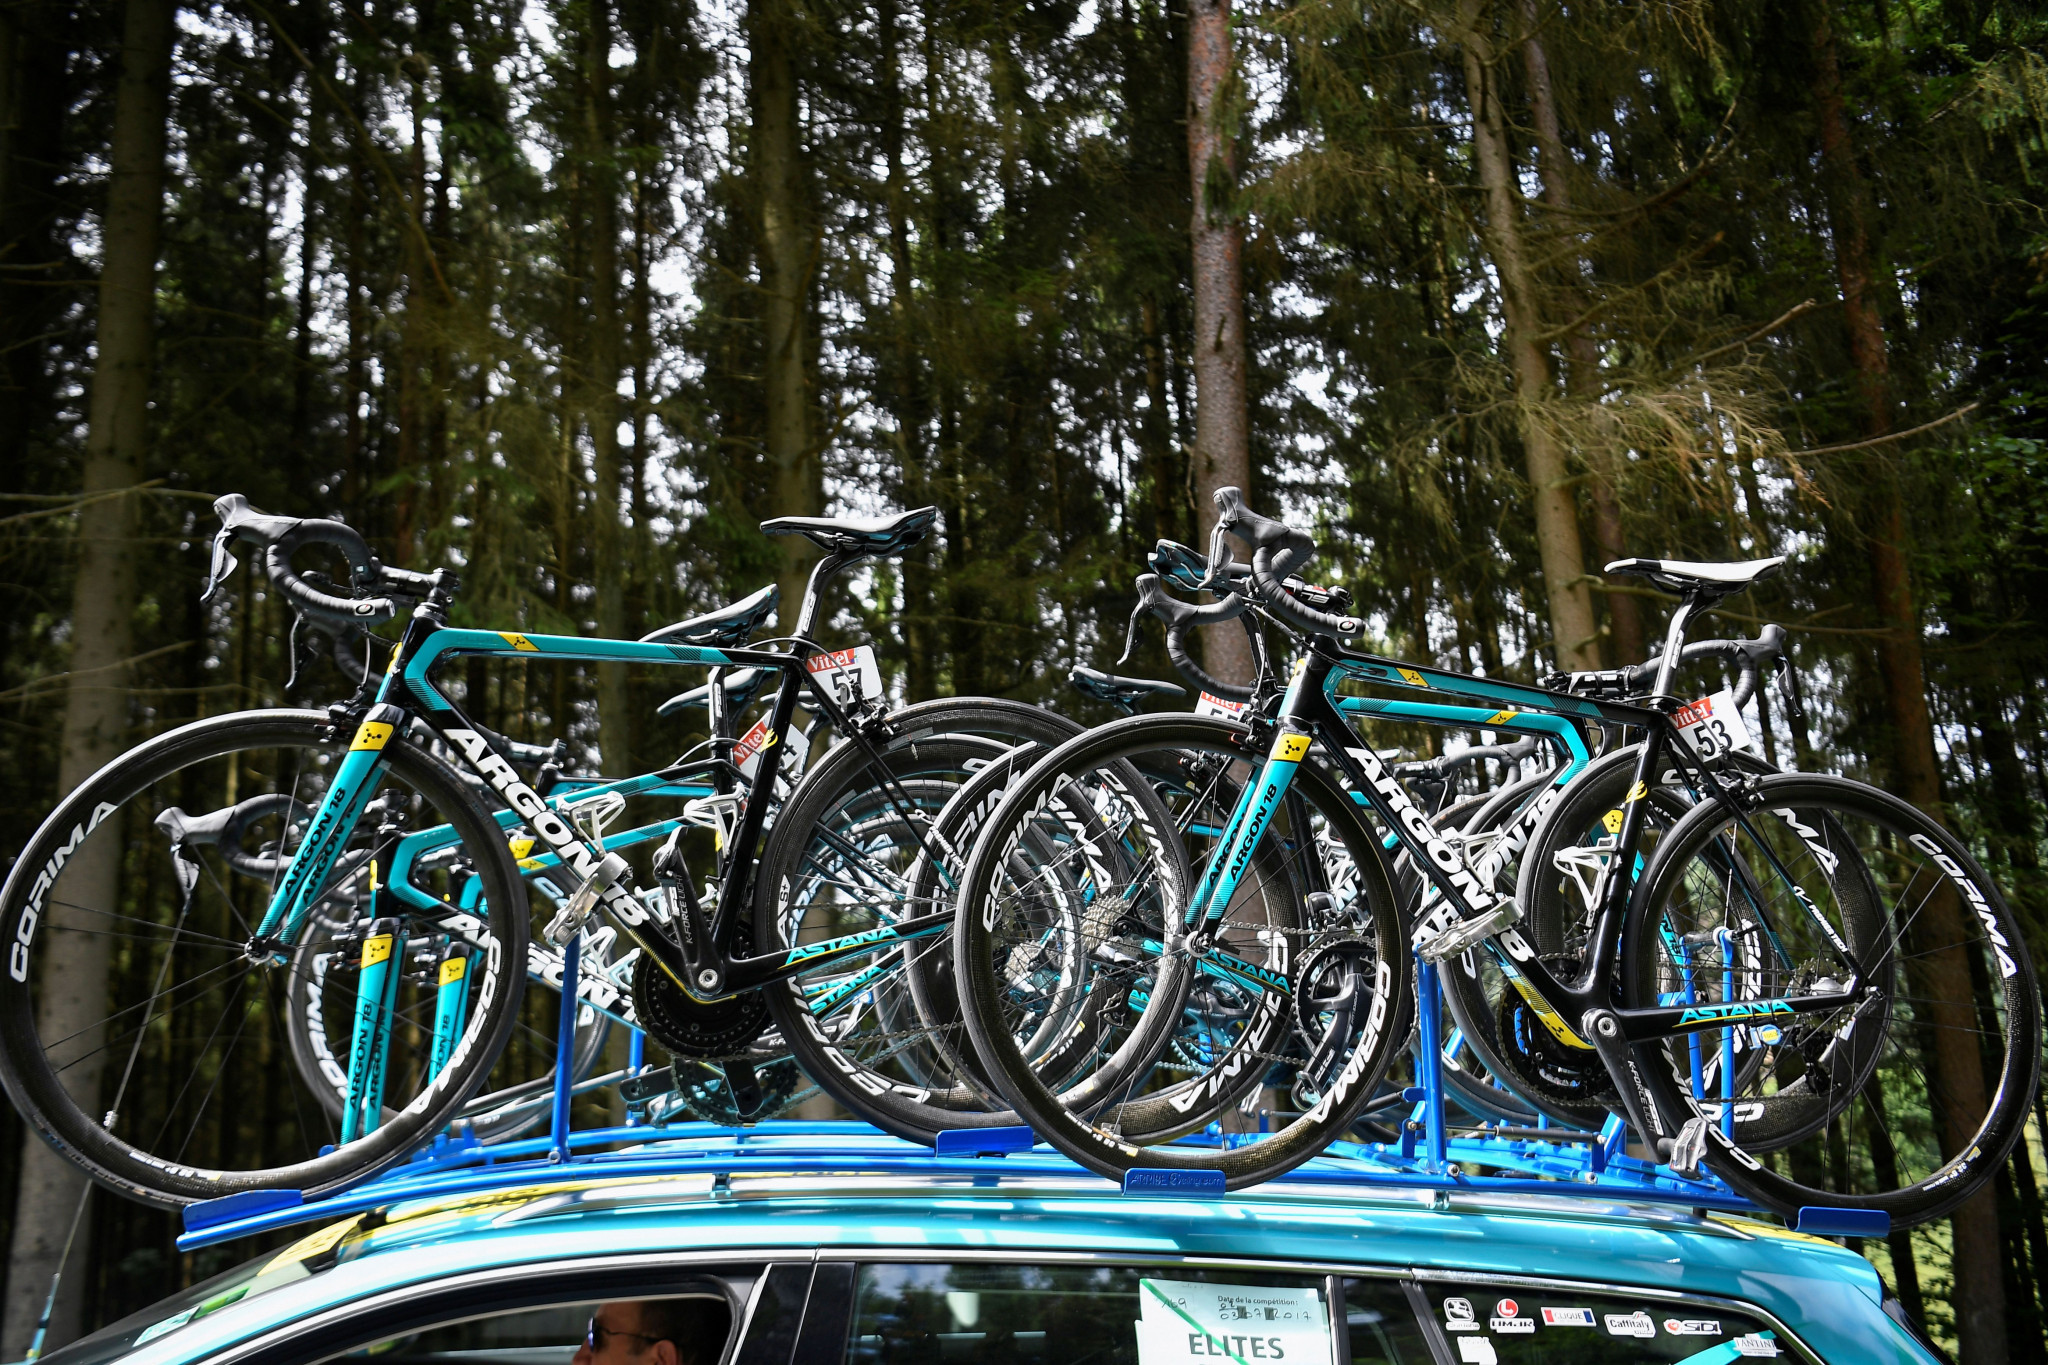 Astana's team car nearly struck a marshall during the Tour de Yorkshire ©Getty Images